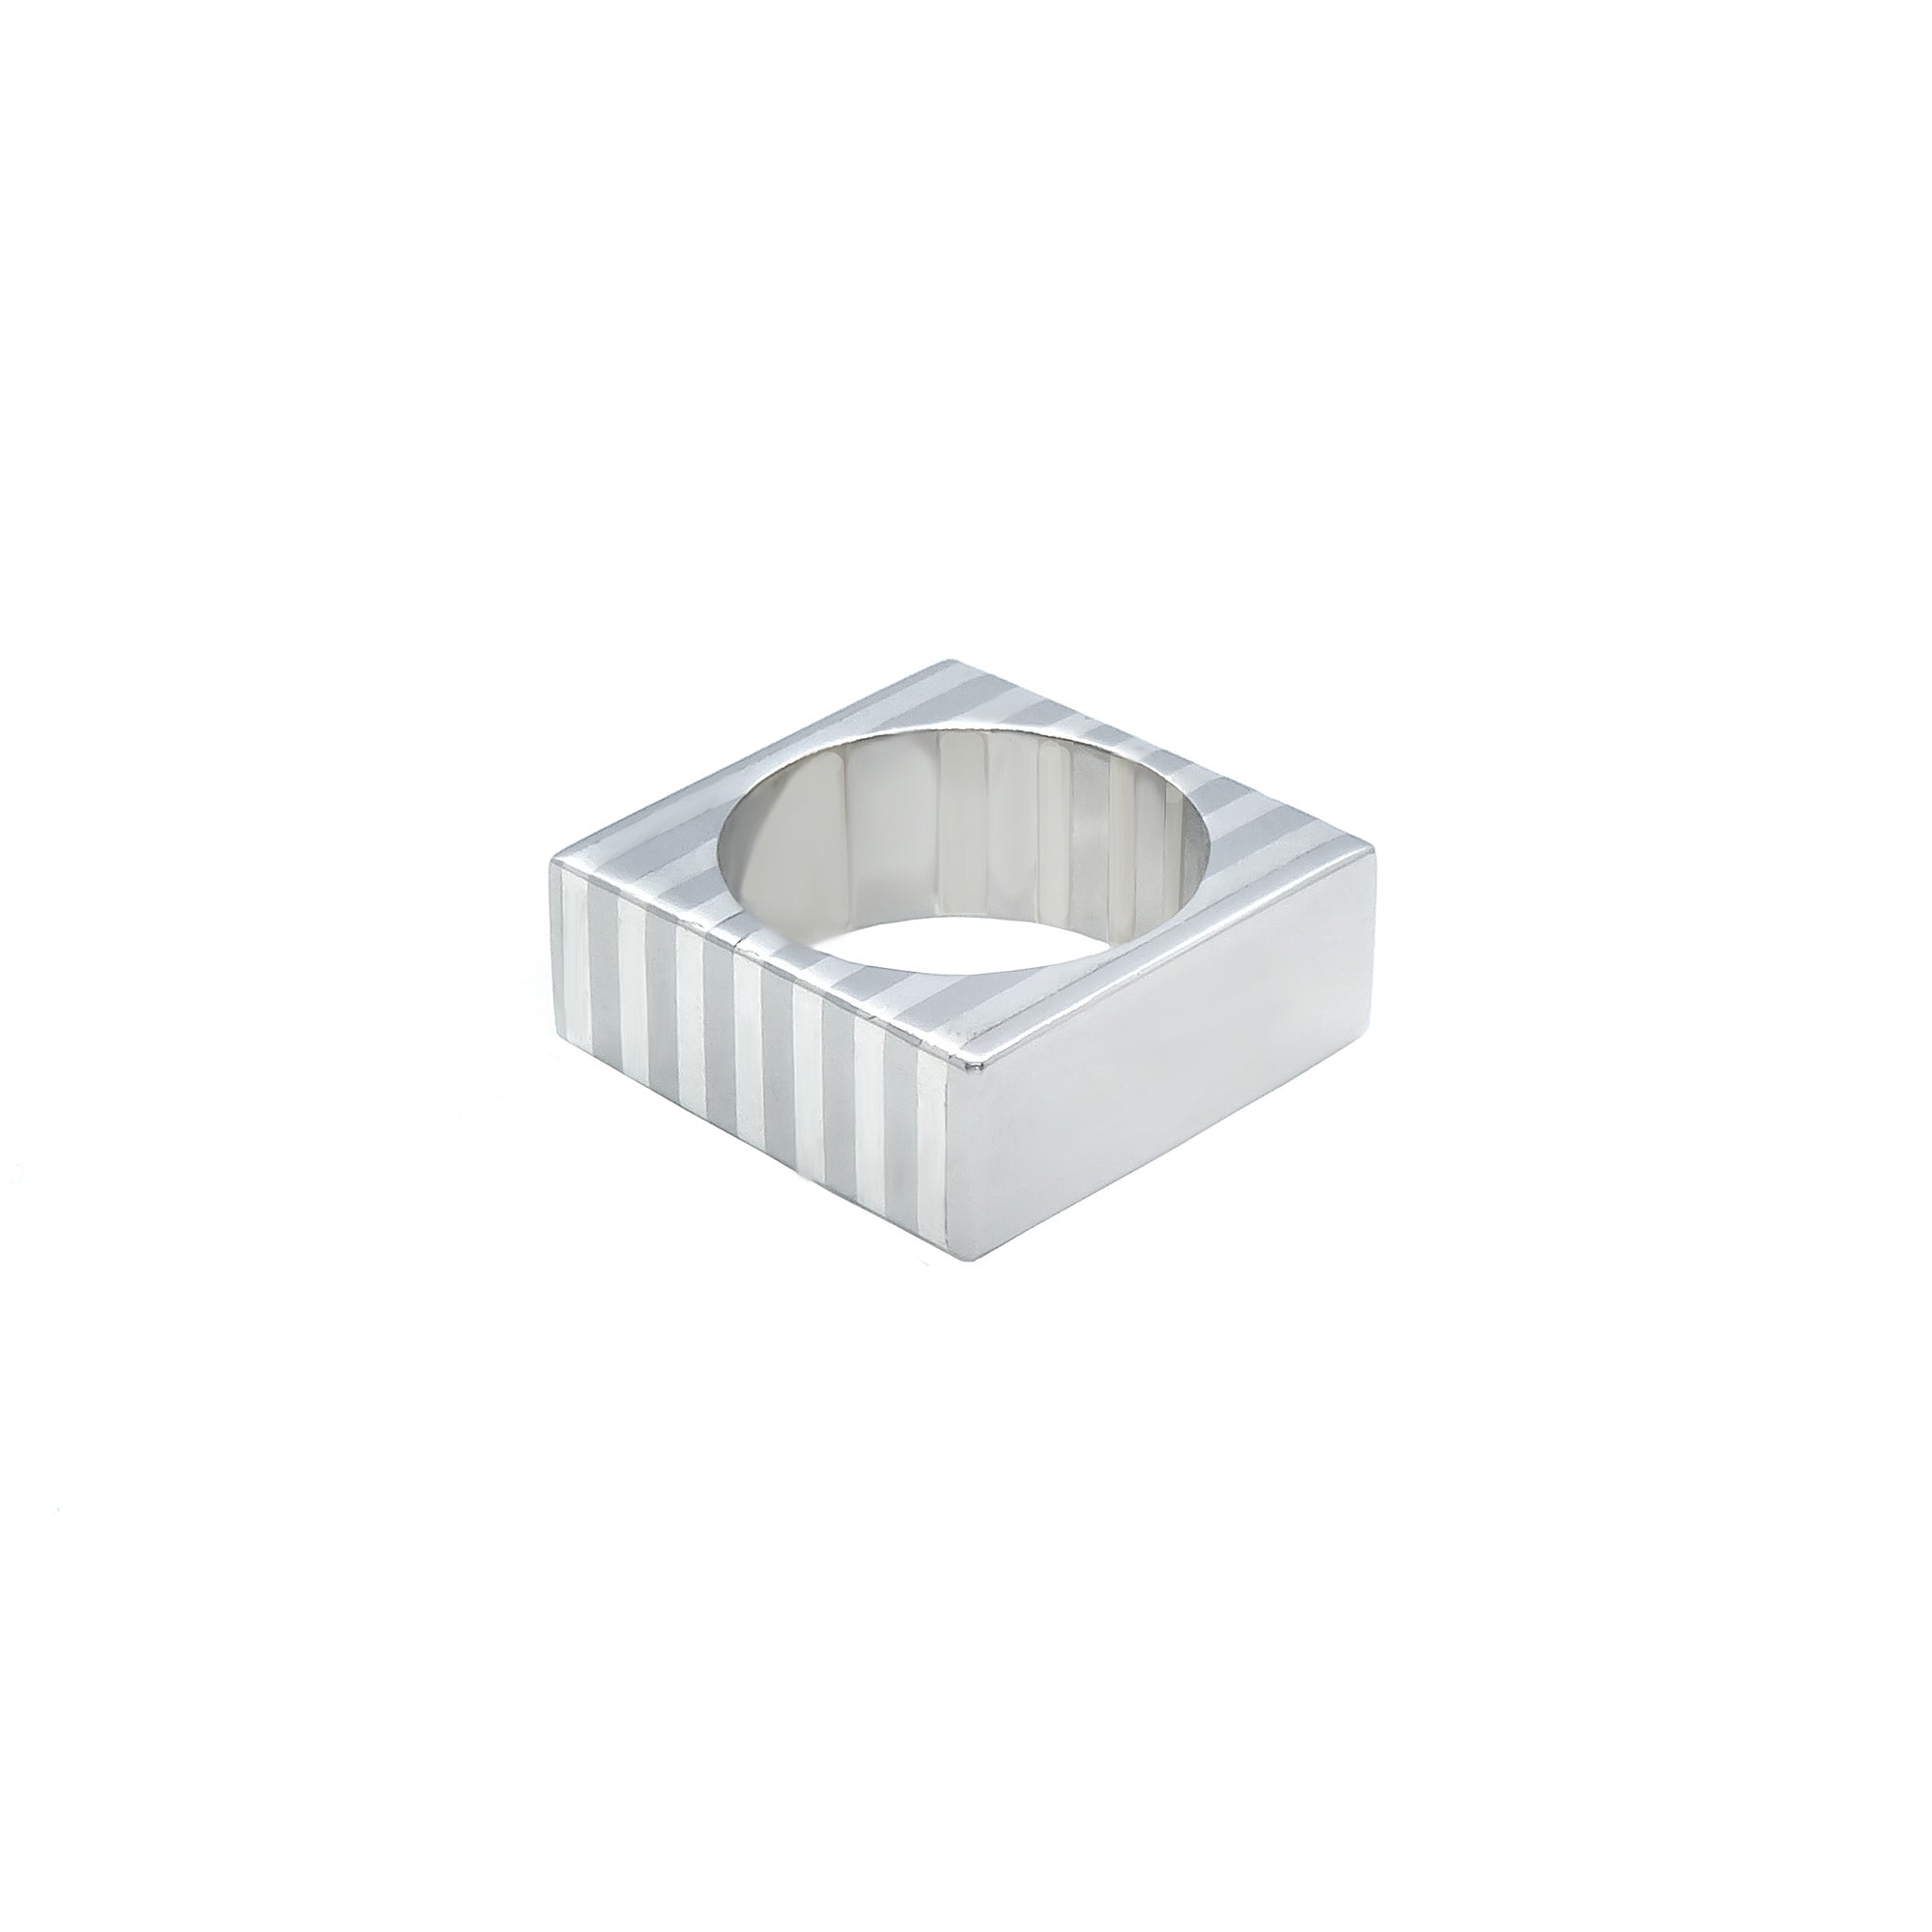 Albernese Square Fusion Ring AG310